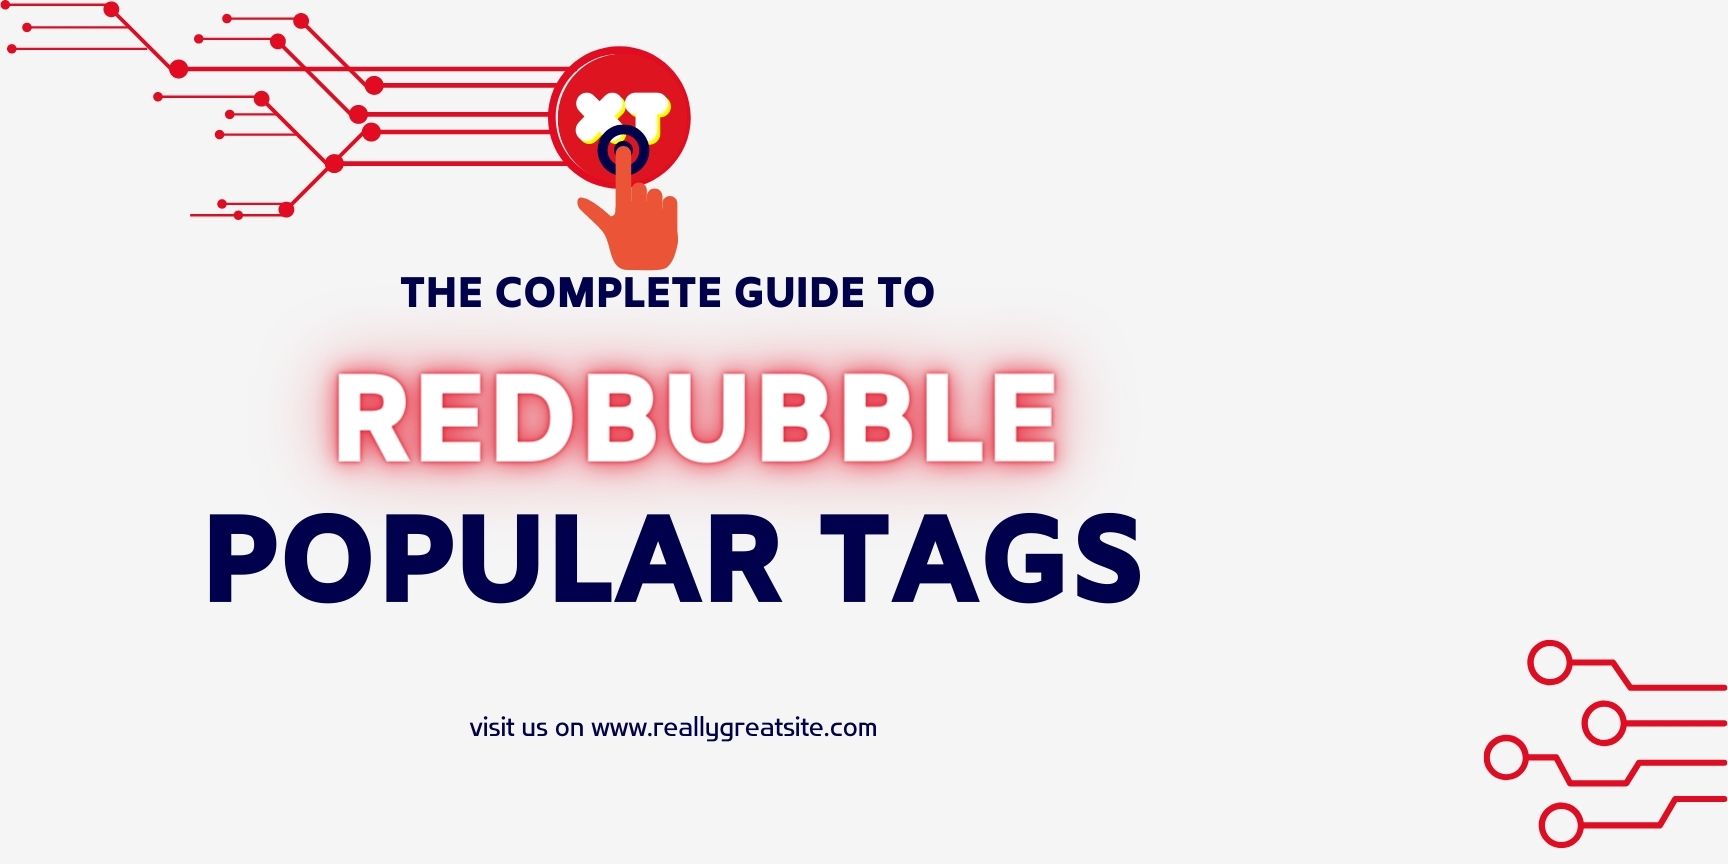 The Complete Guide to Redbubble Popular Tags